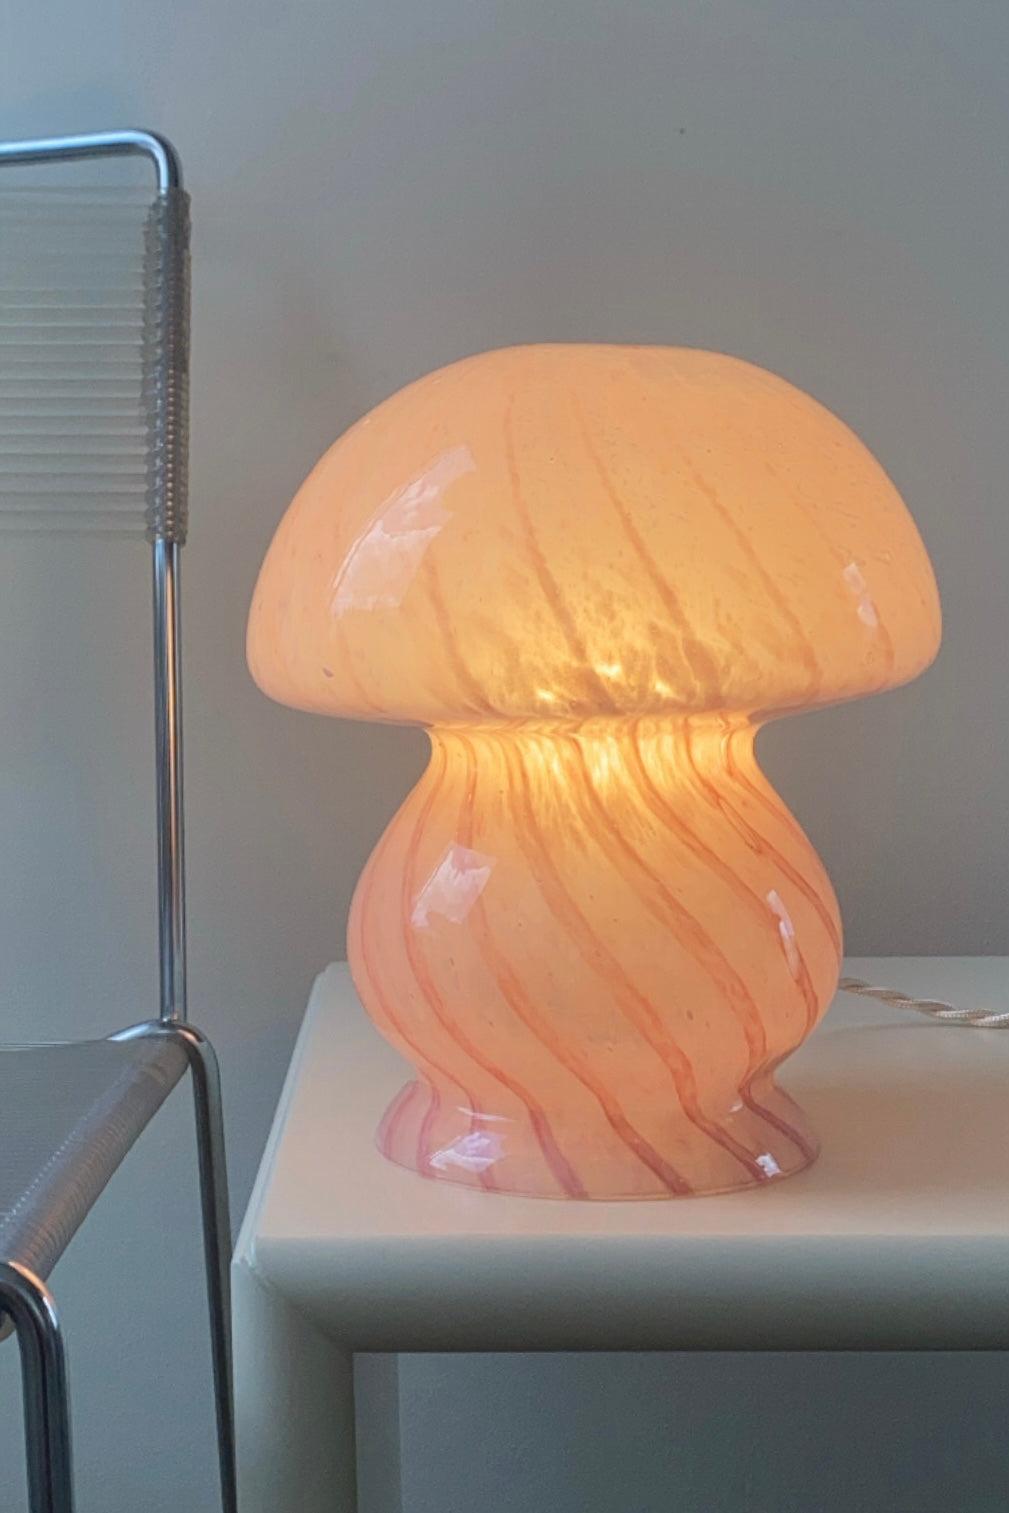 Vintage Murano baby mushroom table lamp. Mouth-blown lamp in pink / pink glass with swirl. The perfect Size for a bedside table. Handmade in Italy, and comes with new white cord.

H:22cm D:18cm. 


